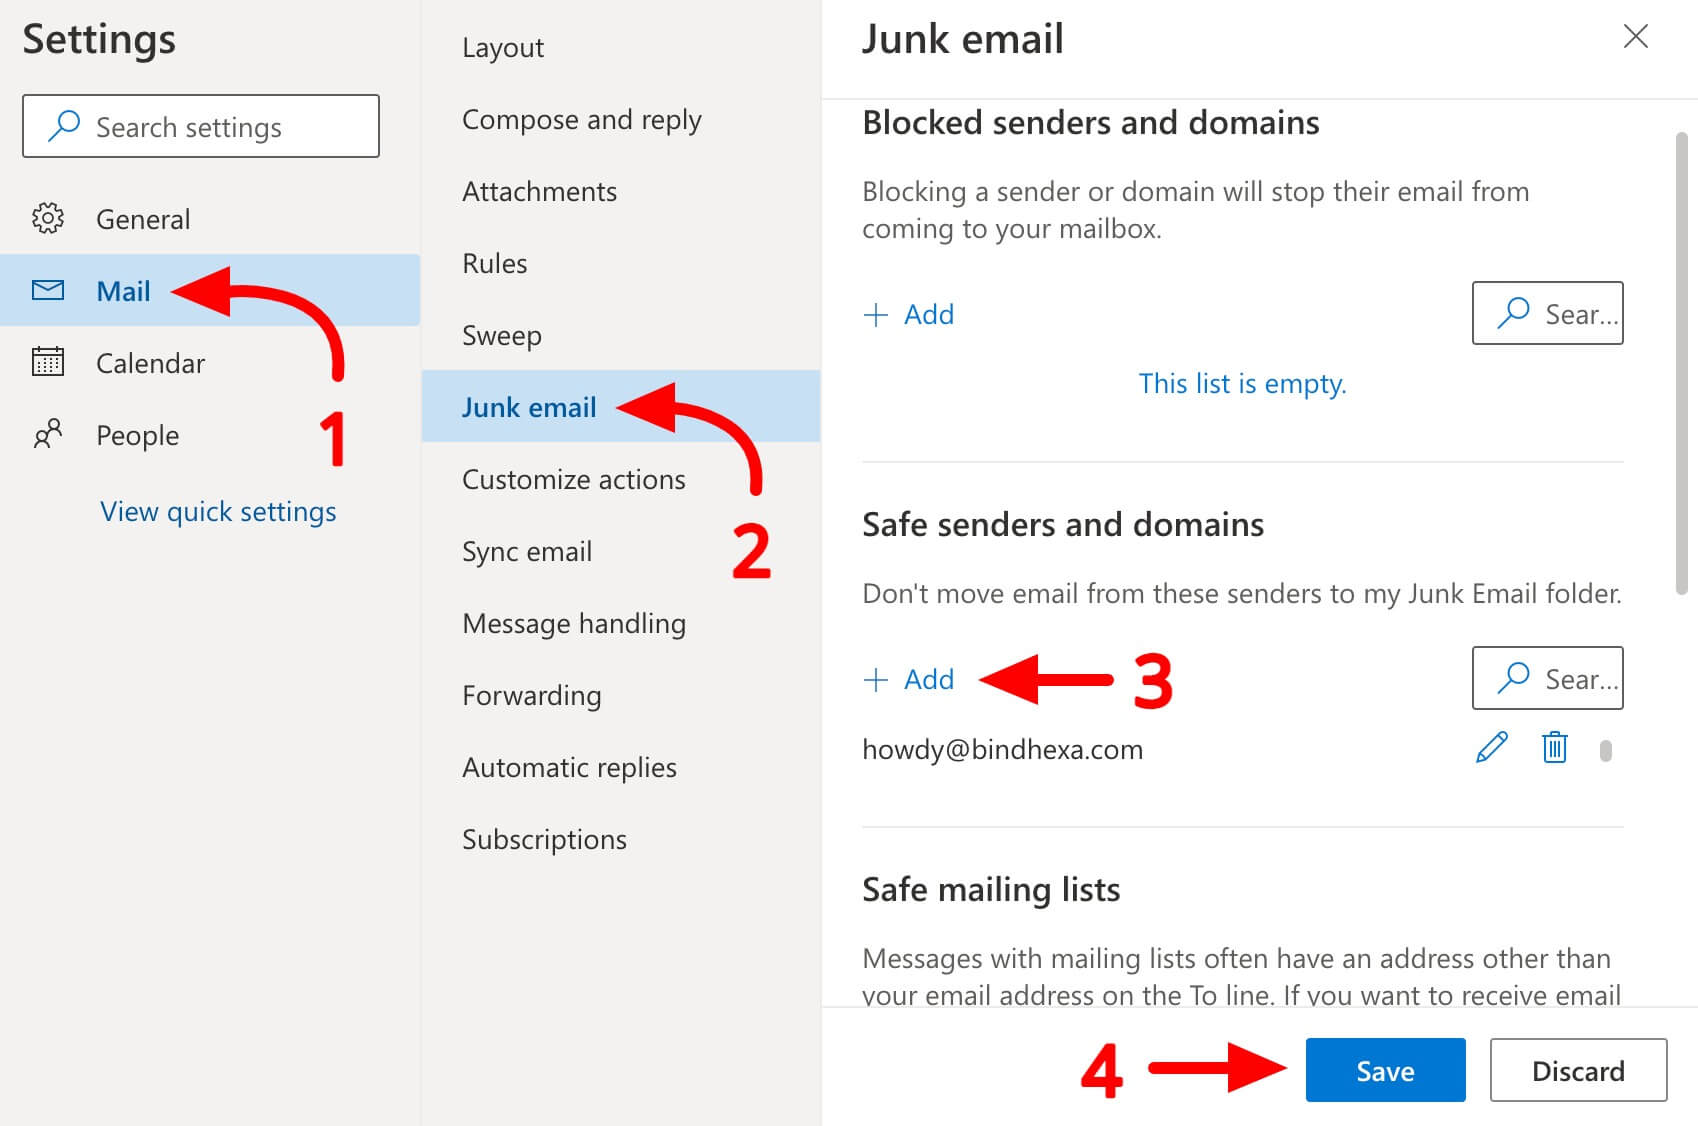 Add email address to the safe senders and domains list in Outlook